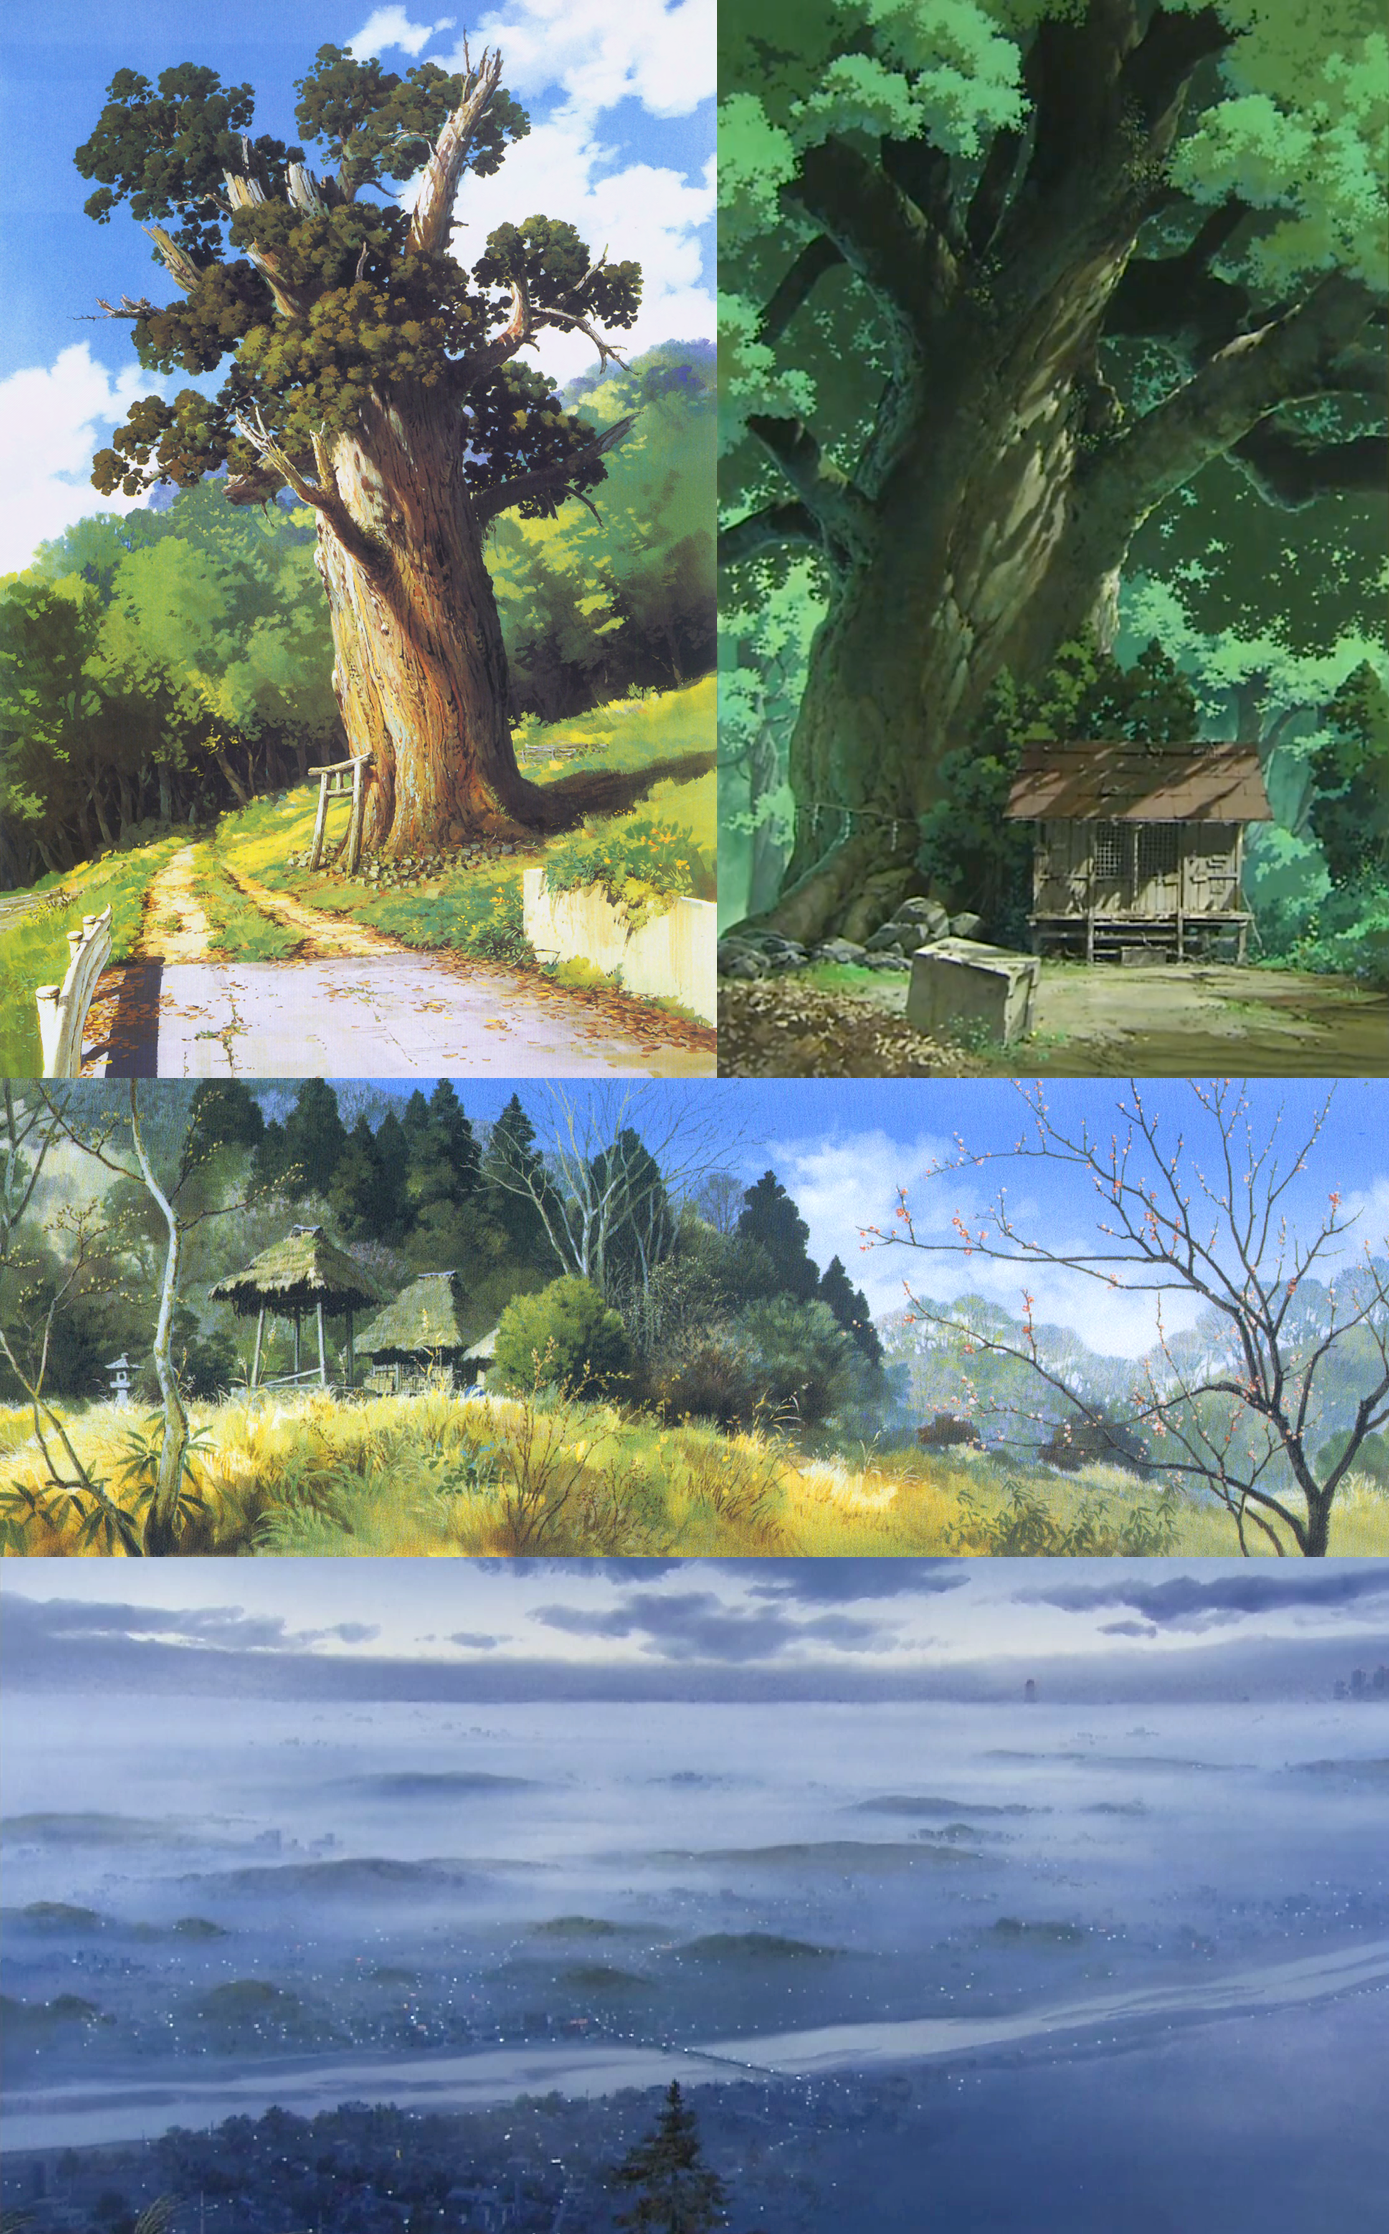 Playing with NICKER POSTER COLOUR // Painting a Ghibli Studio scene 